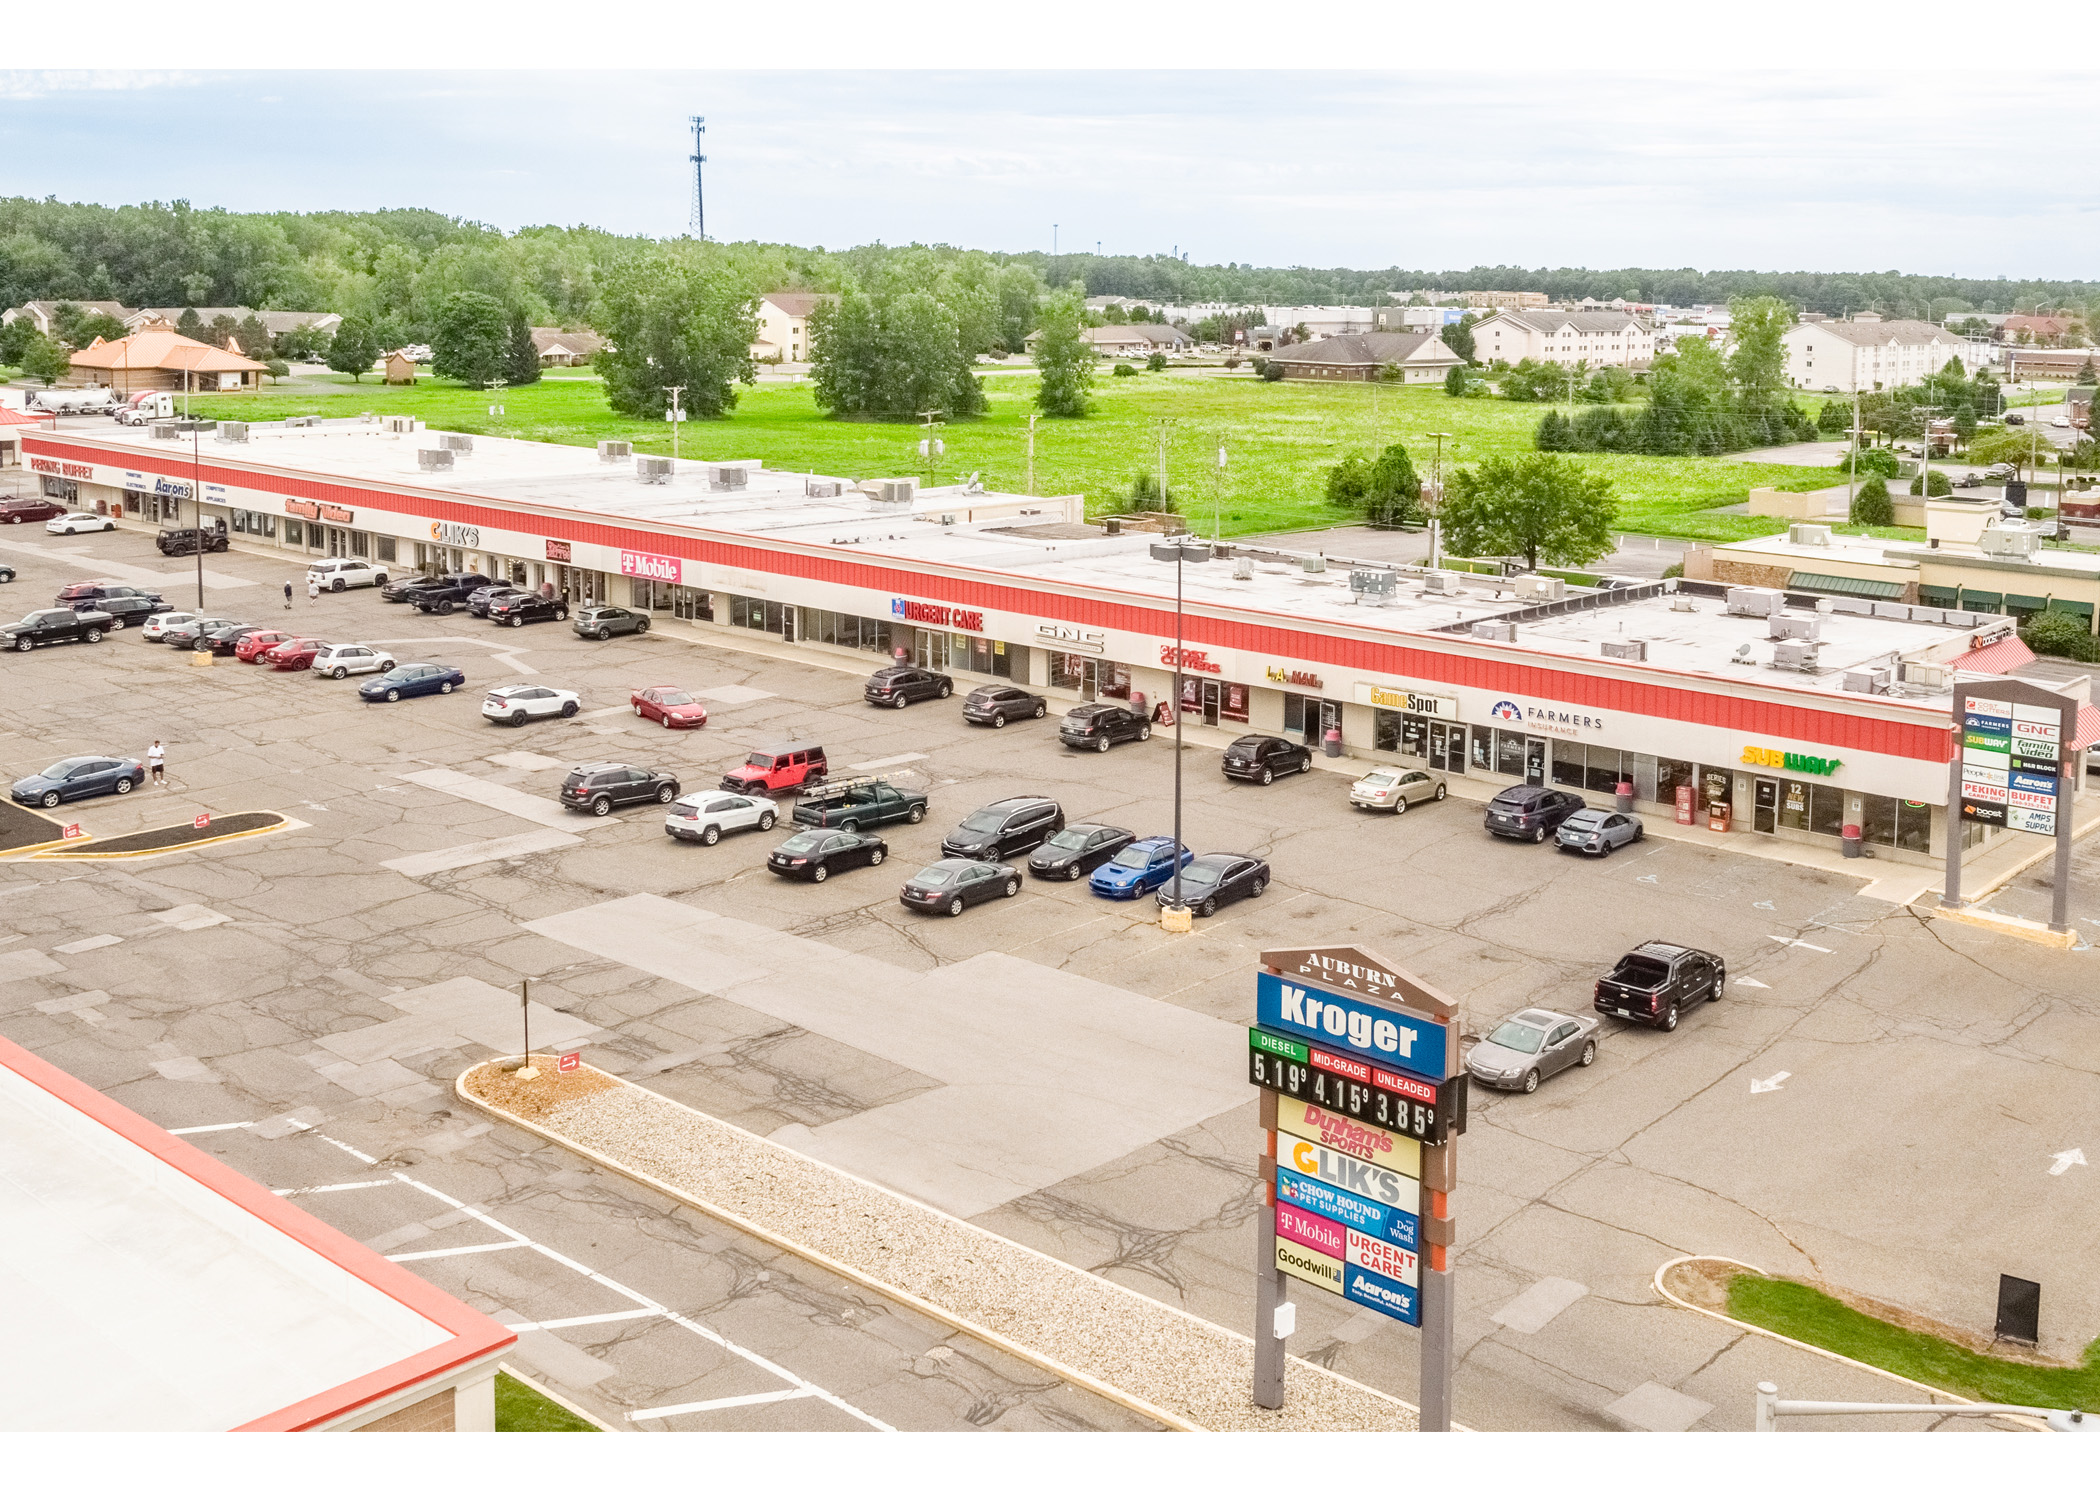 Auburn Plaza, Peking Buffet, Aaron's, Family Video, Clik's, Classic City Tattoo, T-Mobile, Urgent Care, GNC, Cost Cutters, LA Nail, Game Spot, Farmers Insurance, Subway, tenant signs and parking lot aerial view.